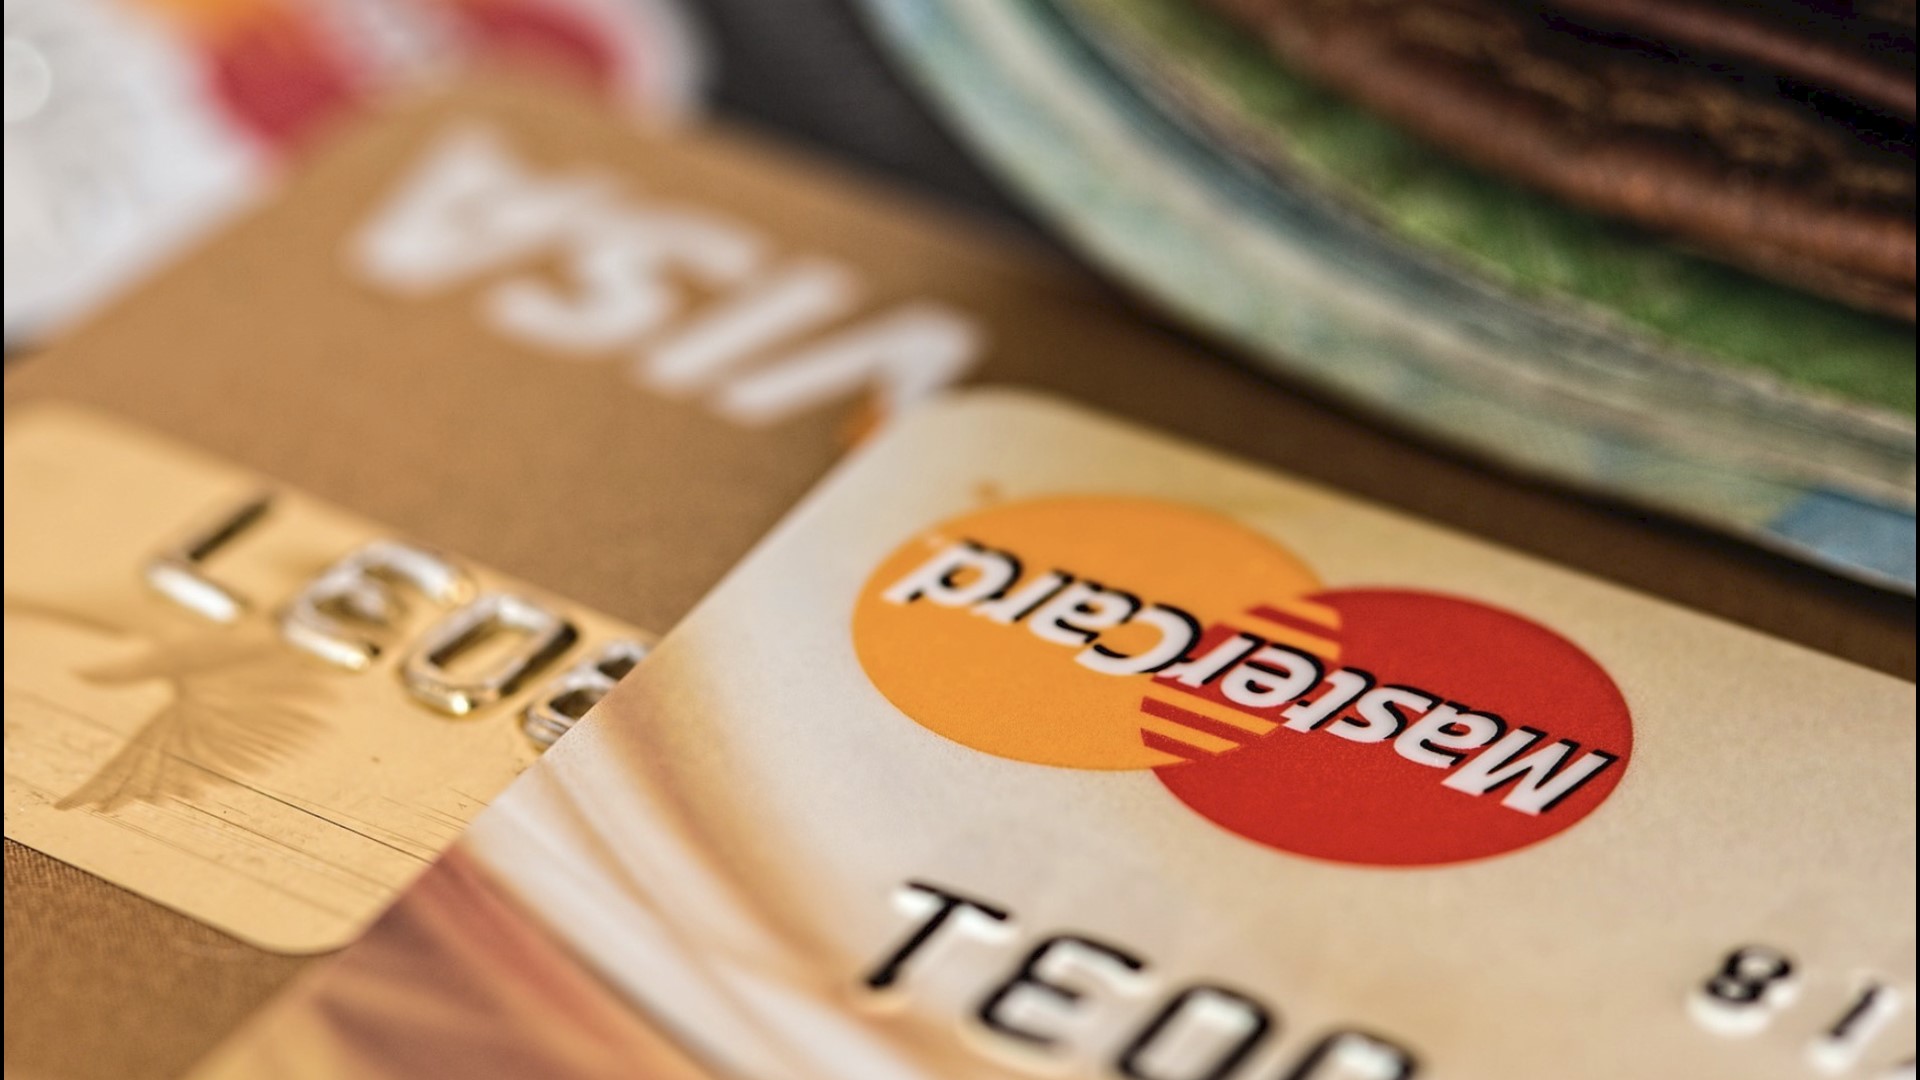 Credit card issuers have been more reserved with giving out new credit cards since the economy took a hit, even significantly reducing credit limits.